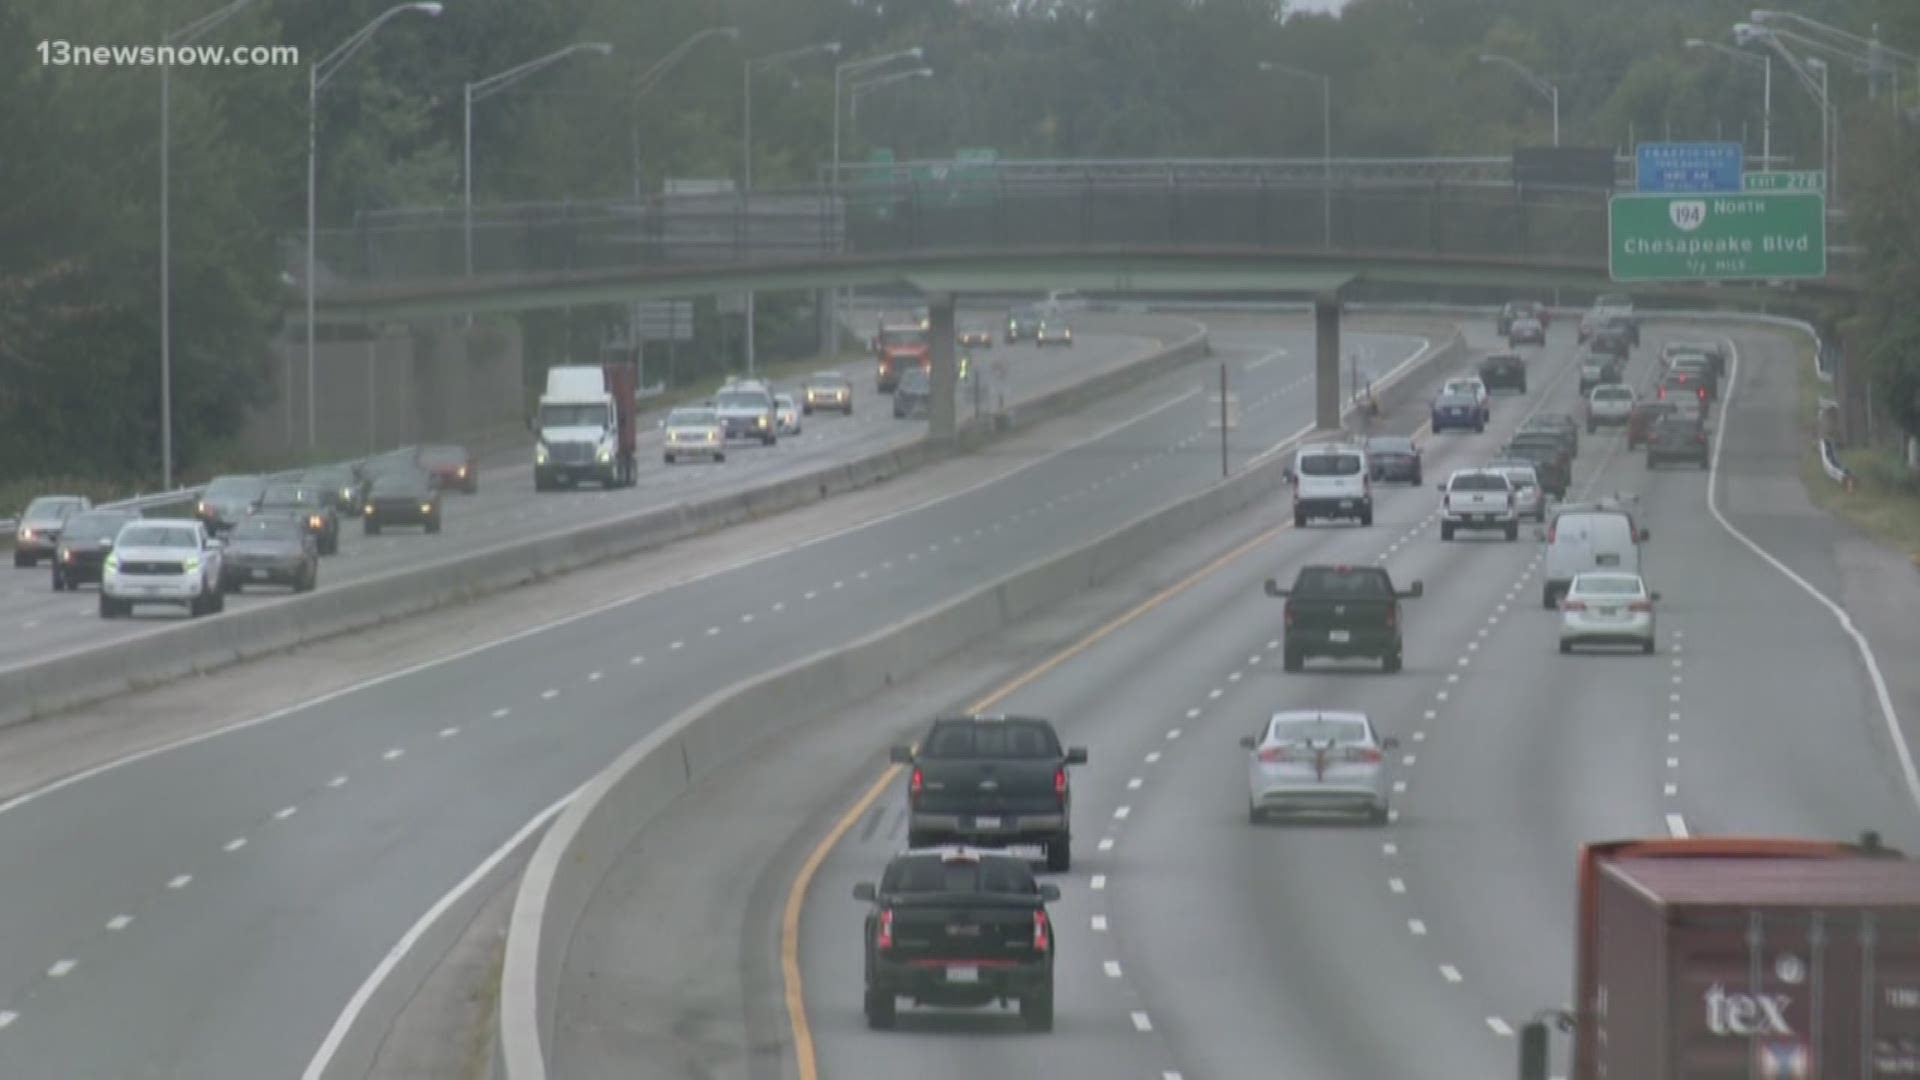 13News Now pulled the data to see if I-64 Express Lanes live up to their expectations when it comes to alleviating traffic congestion.